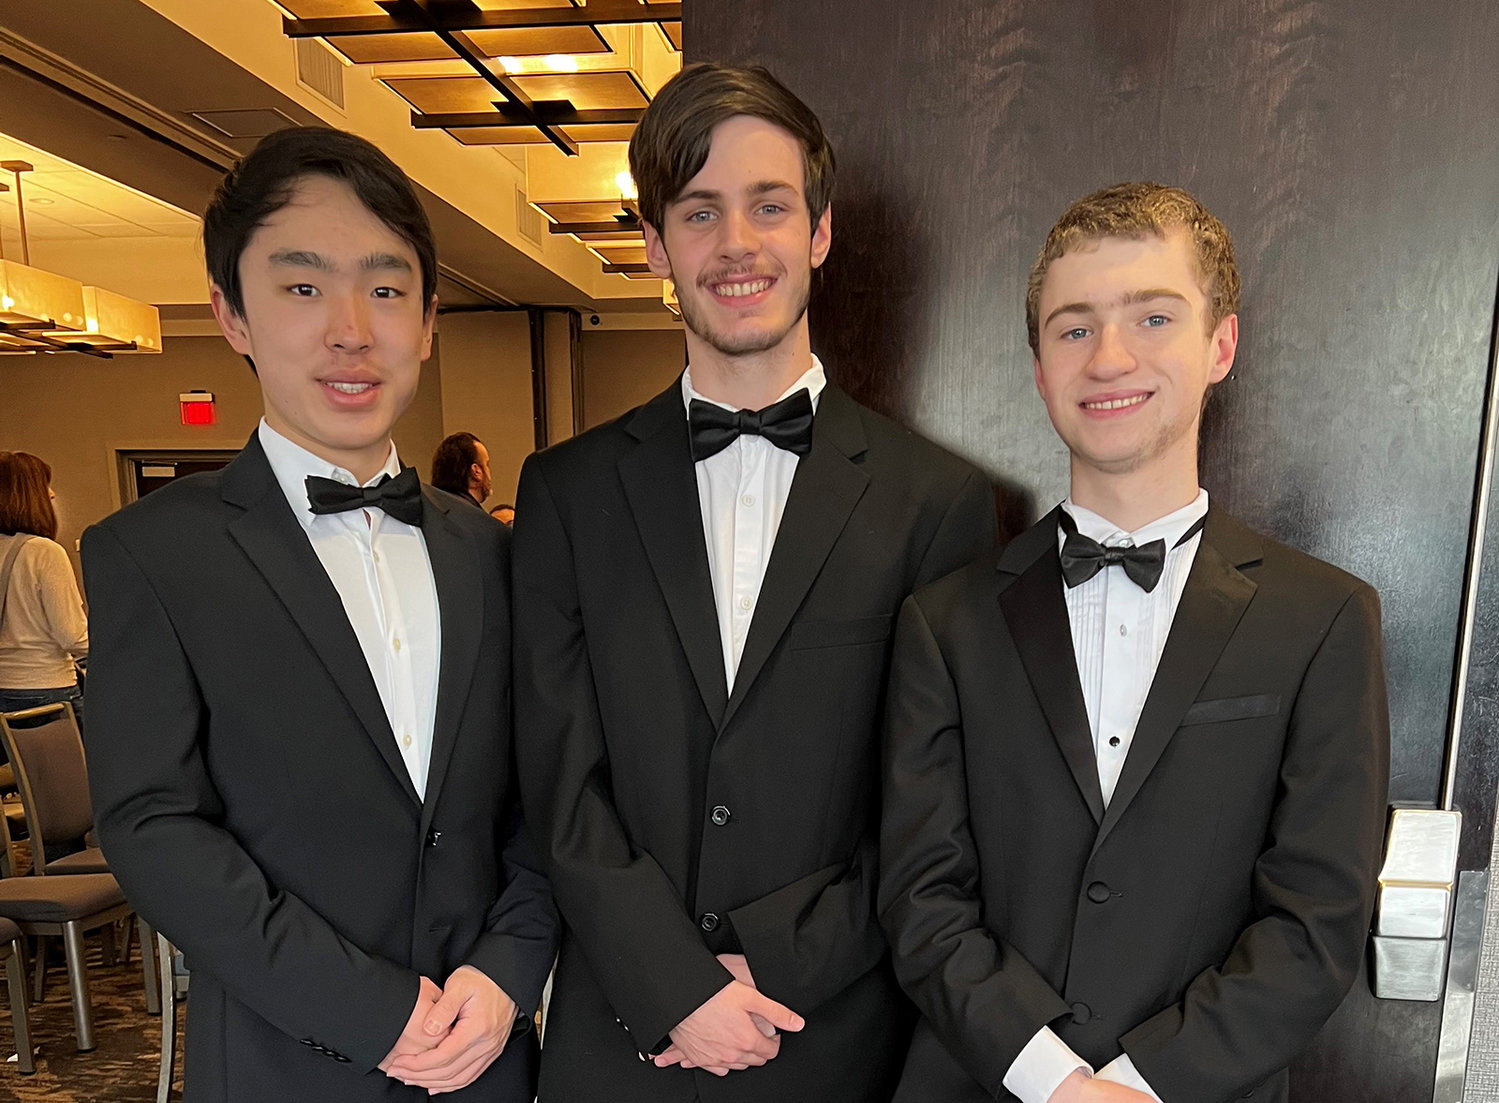 Pictured are William Floyd High School NYSBDA Honors Band selections
(left to right): Ian Hua, Justin Cooke and Kurtis Chamberlain.